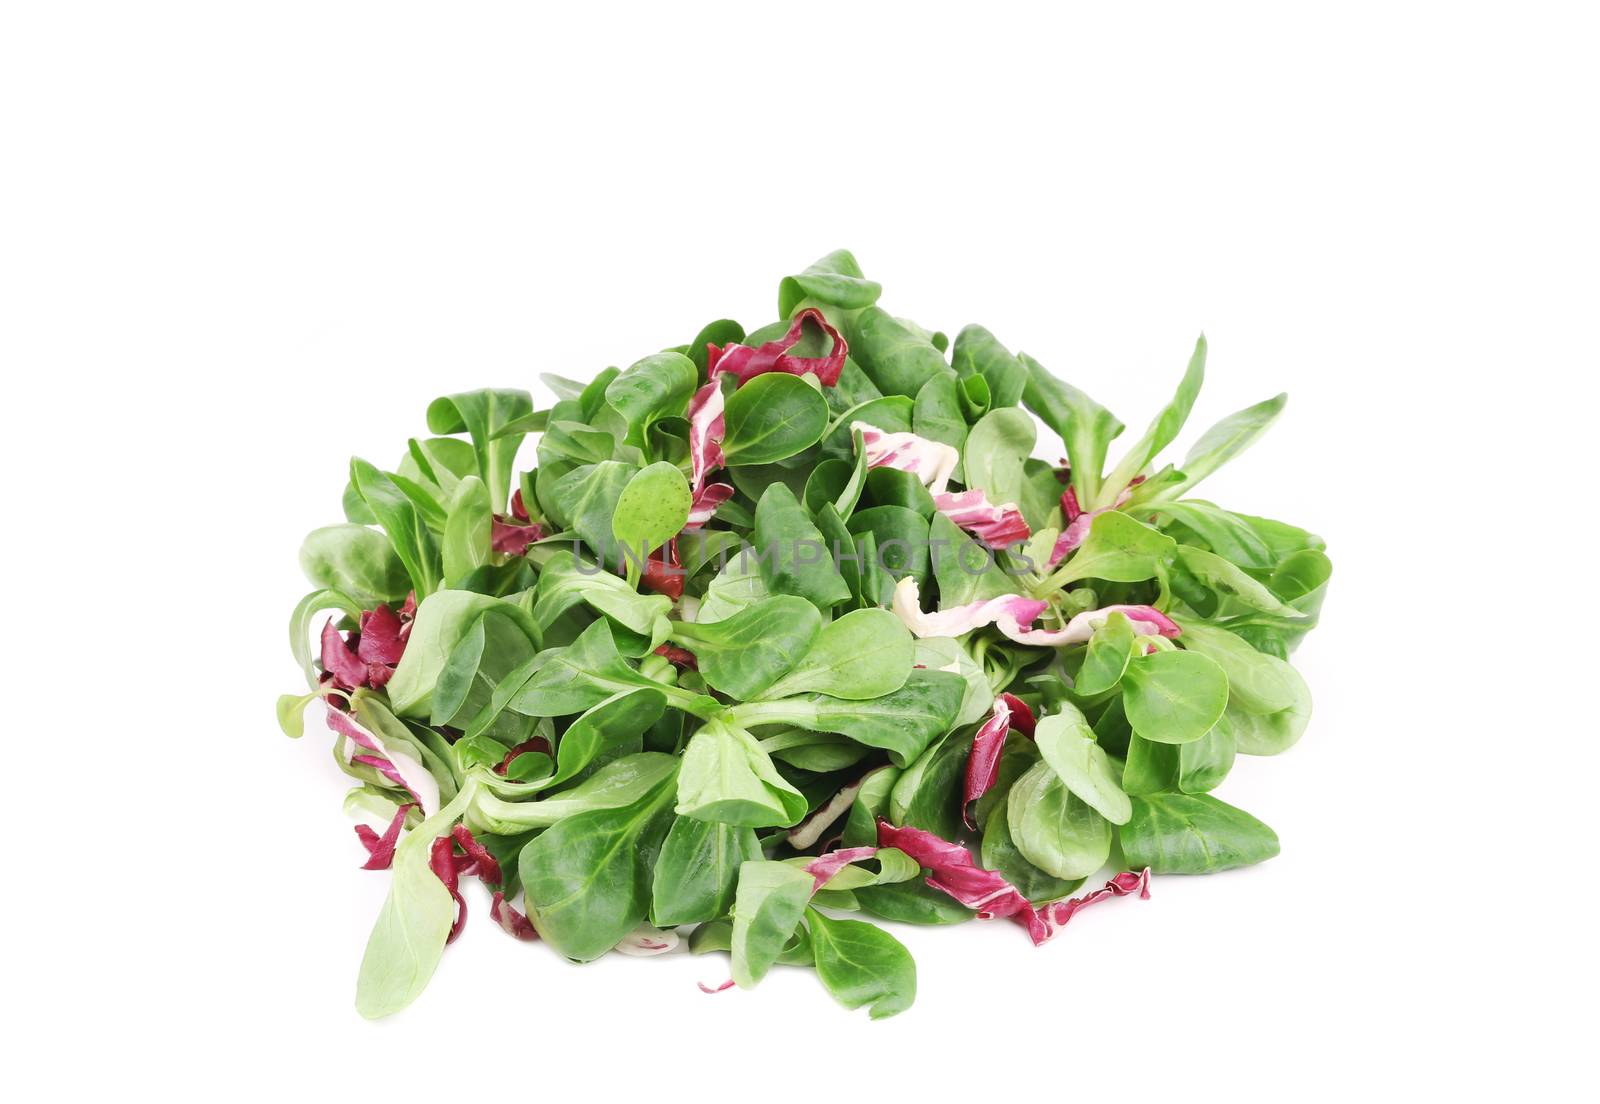 Spinach and radicchio rosso mix. by indigolotos